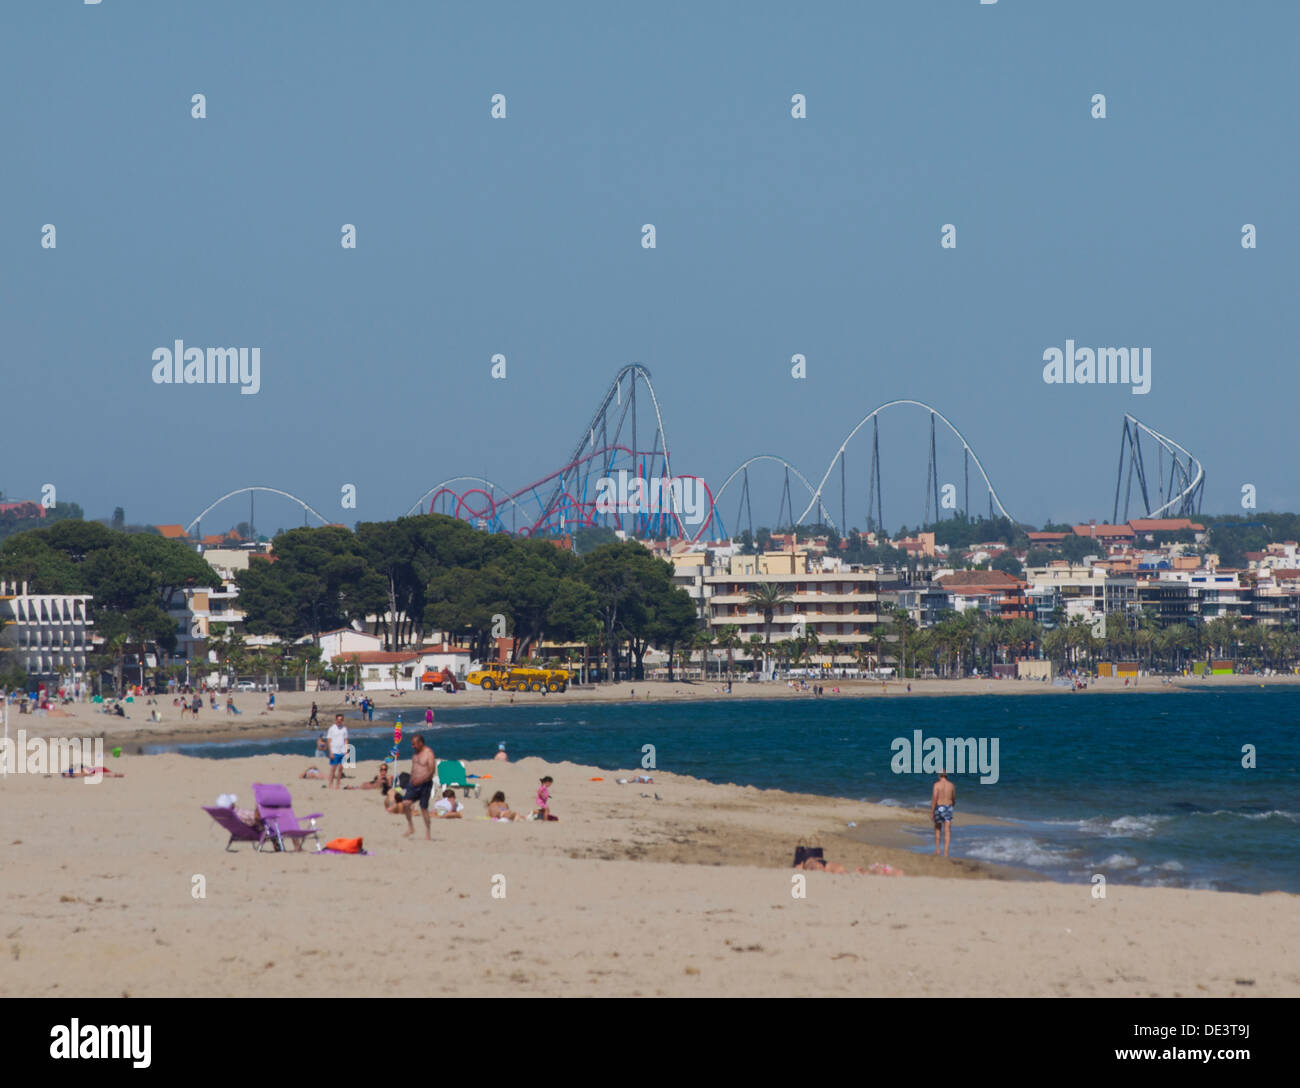 Beach with a theme park in the background Stock Photo